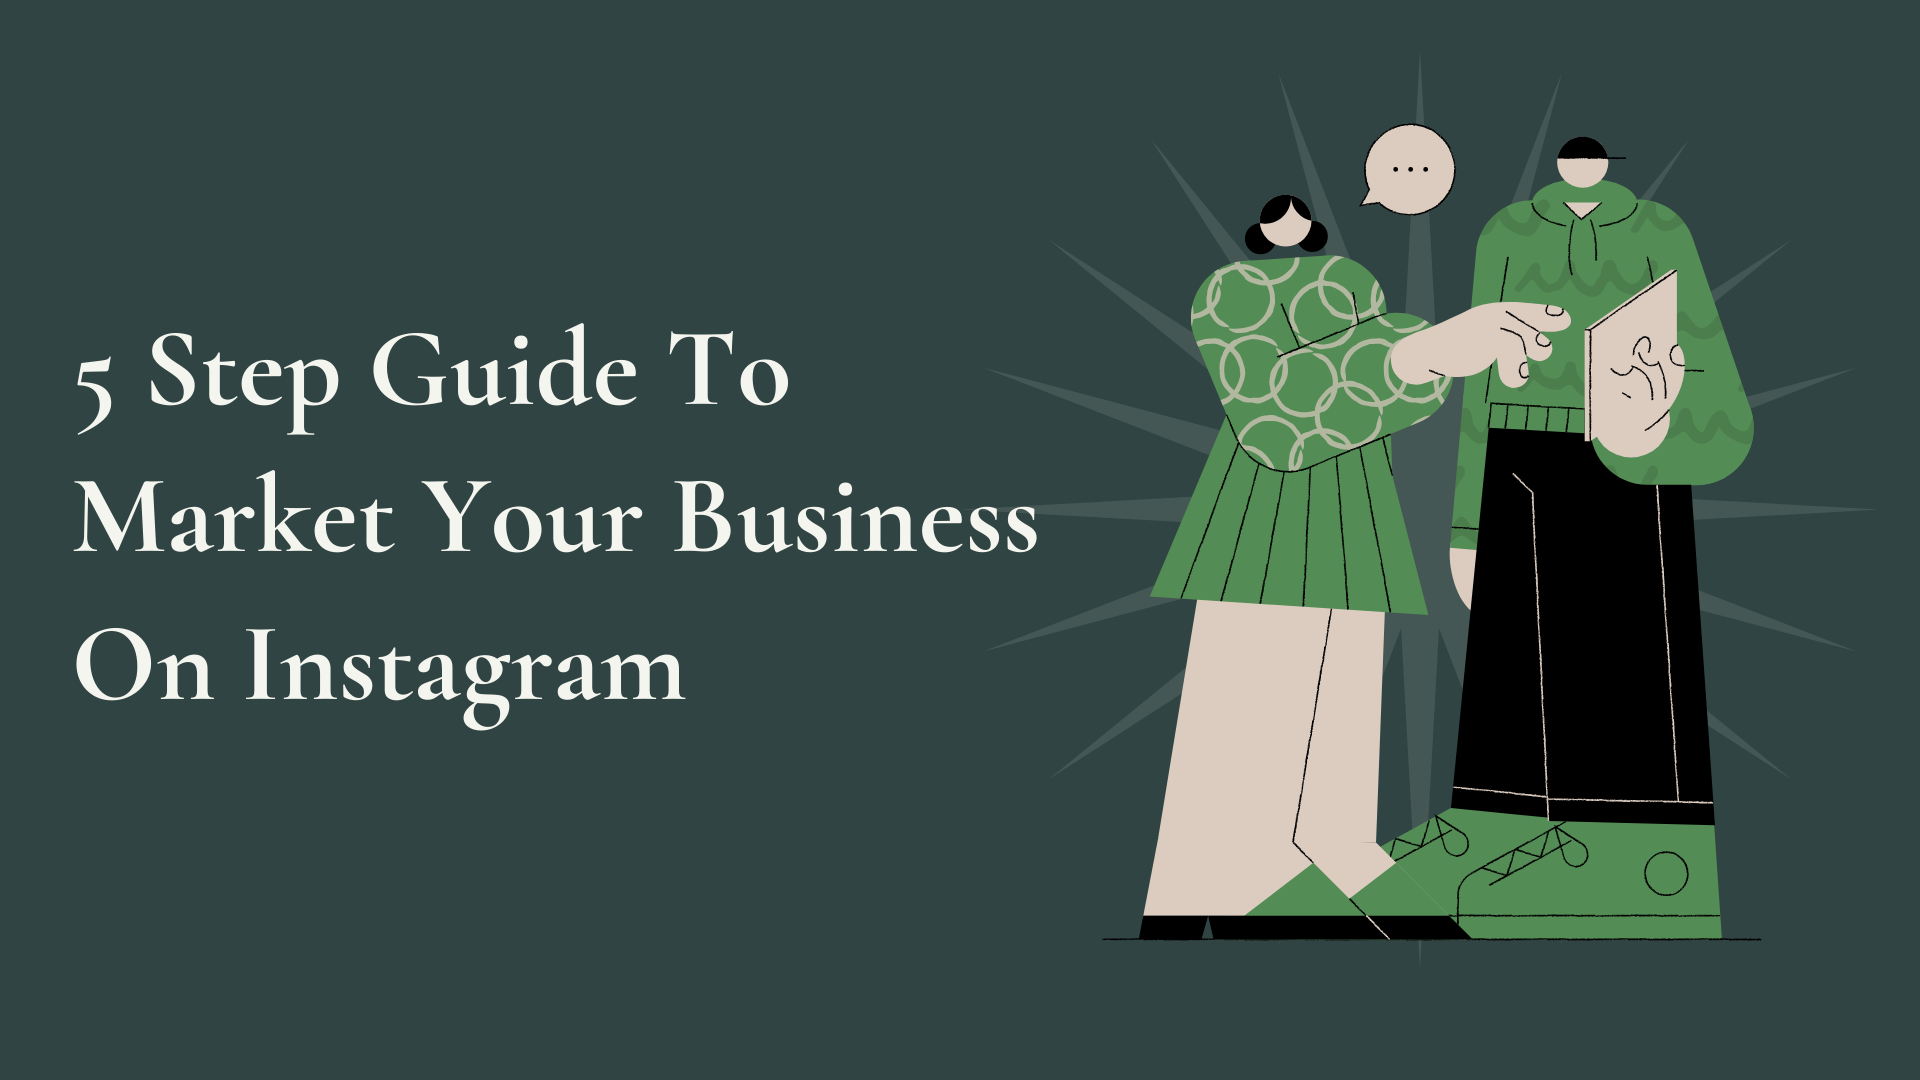 How To Use Instagram To Market Your Business